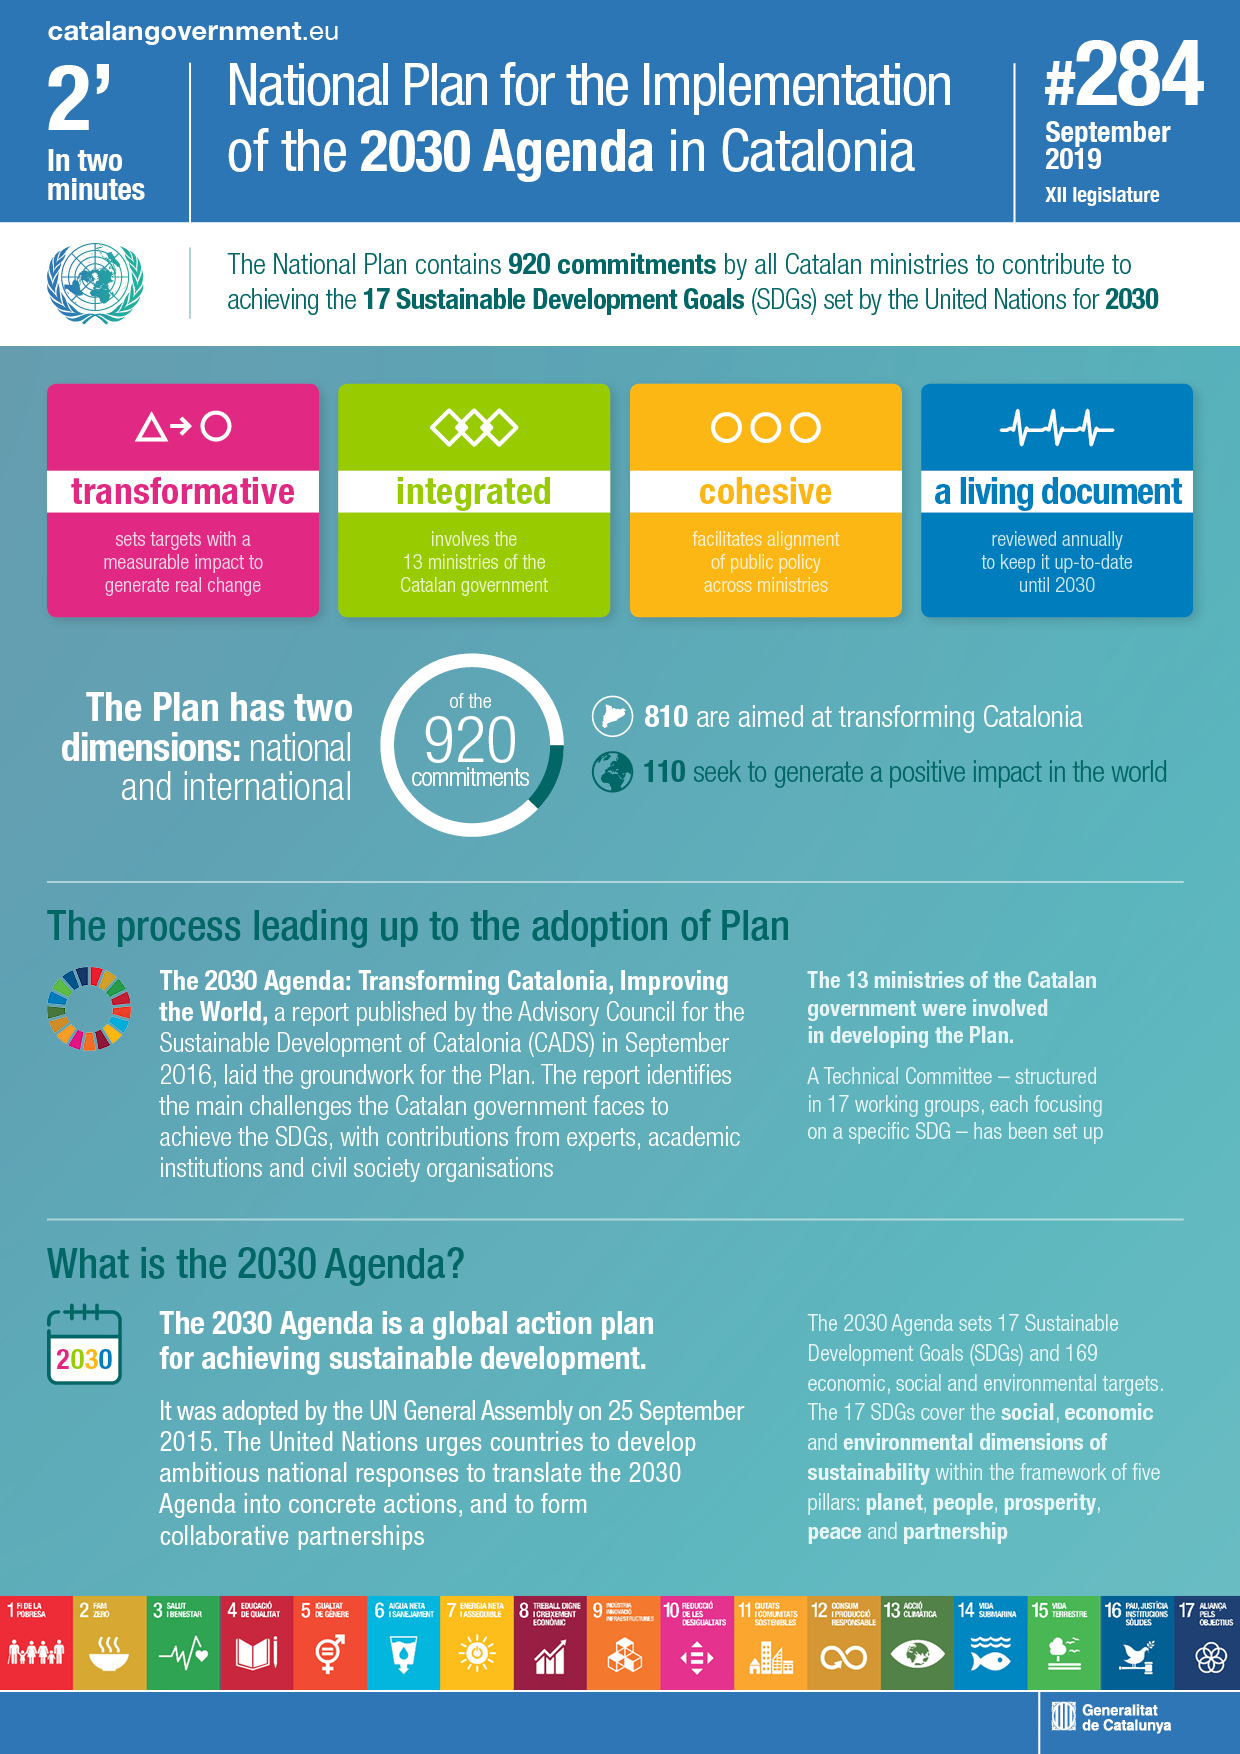 The National Plan contains 920 commitments by all Catalan ministries to contribute to achieving the 17 Sustainable Development Goals (SDGs) set by the United Nations for 2030 